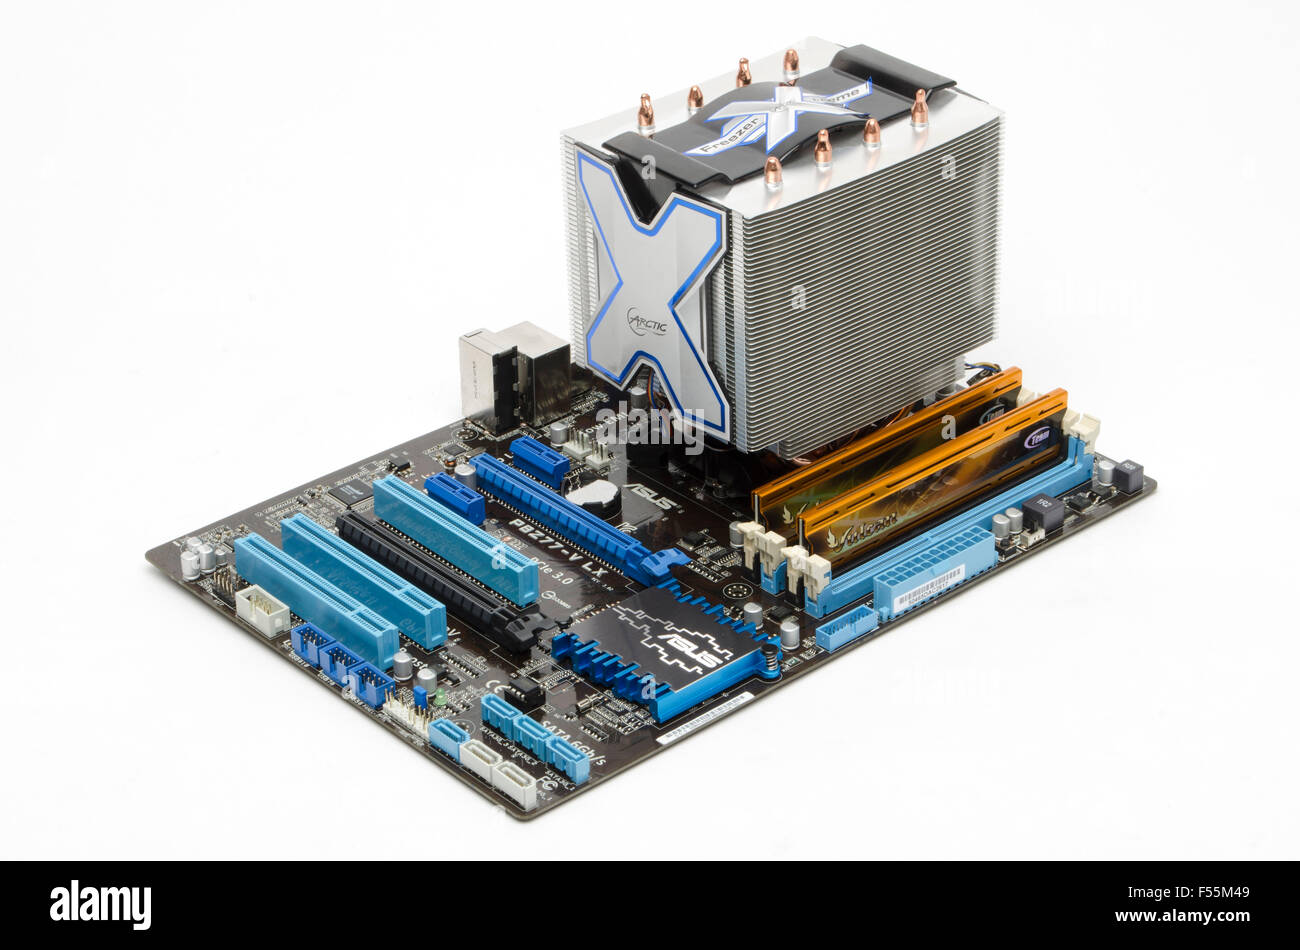 ASUS motherboard (P8Z77-V LX) with Arctic Cooler Freezer Xtreme CPU cooler Team Vulcan DDR3 memory sticks in situ. Stock Photo